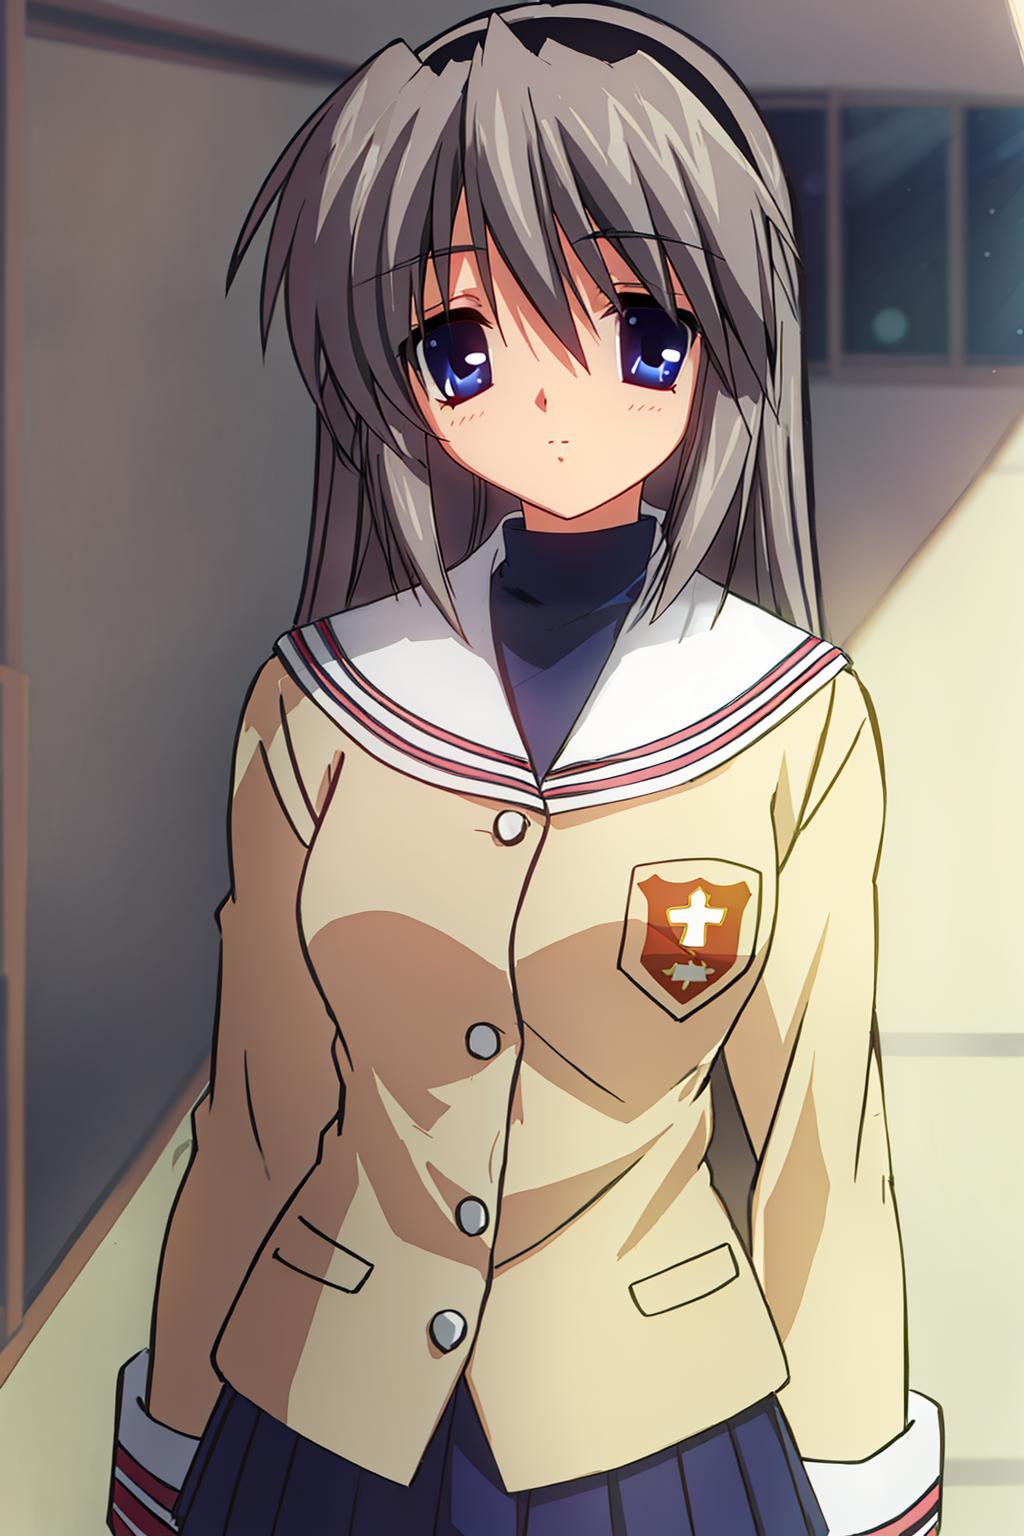 AnimeManga Otaku Fan Club Page  Title Clannad After Story Genre  Drama Romance Slice of Life Episodes 24 Prequel Clannad Type TV Series  Age Rating Teen 13 Rating 810 Voice Available Japanese